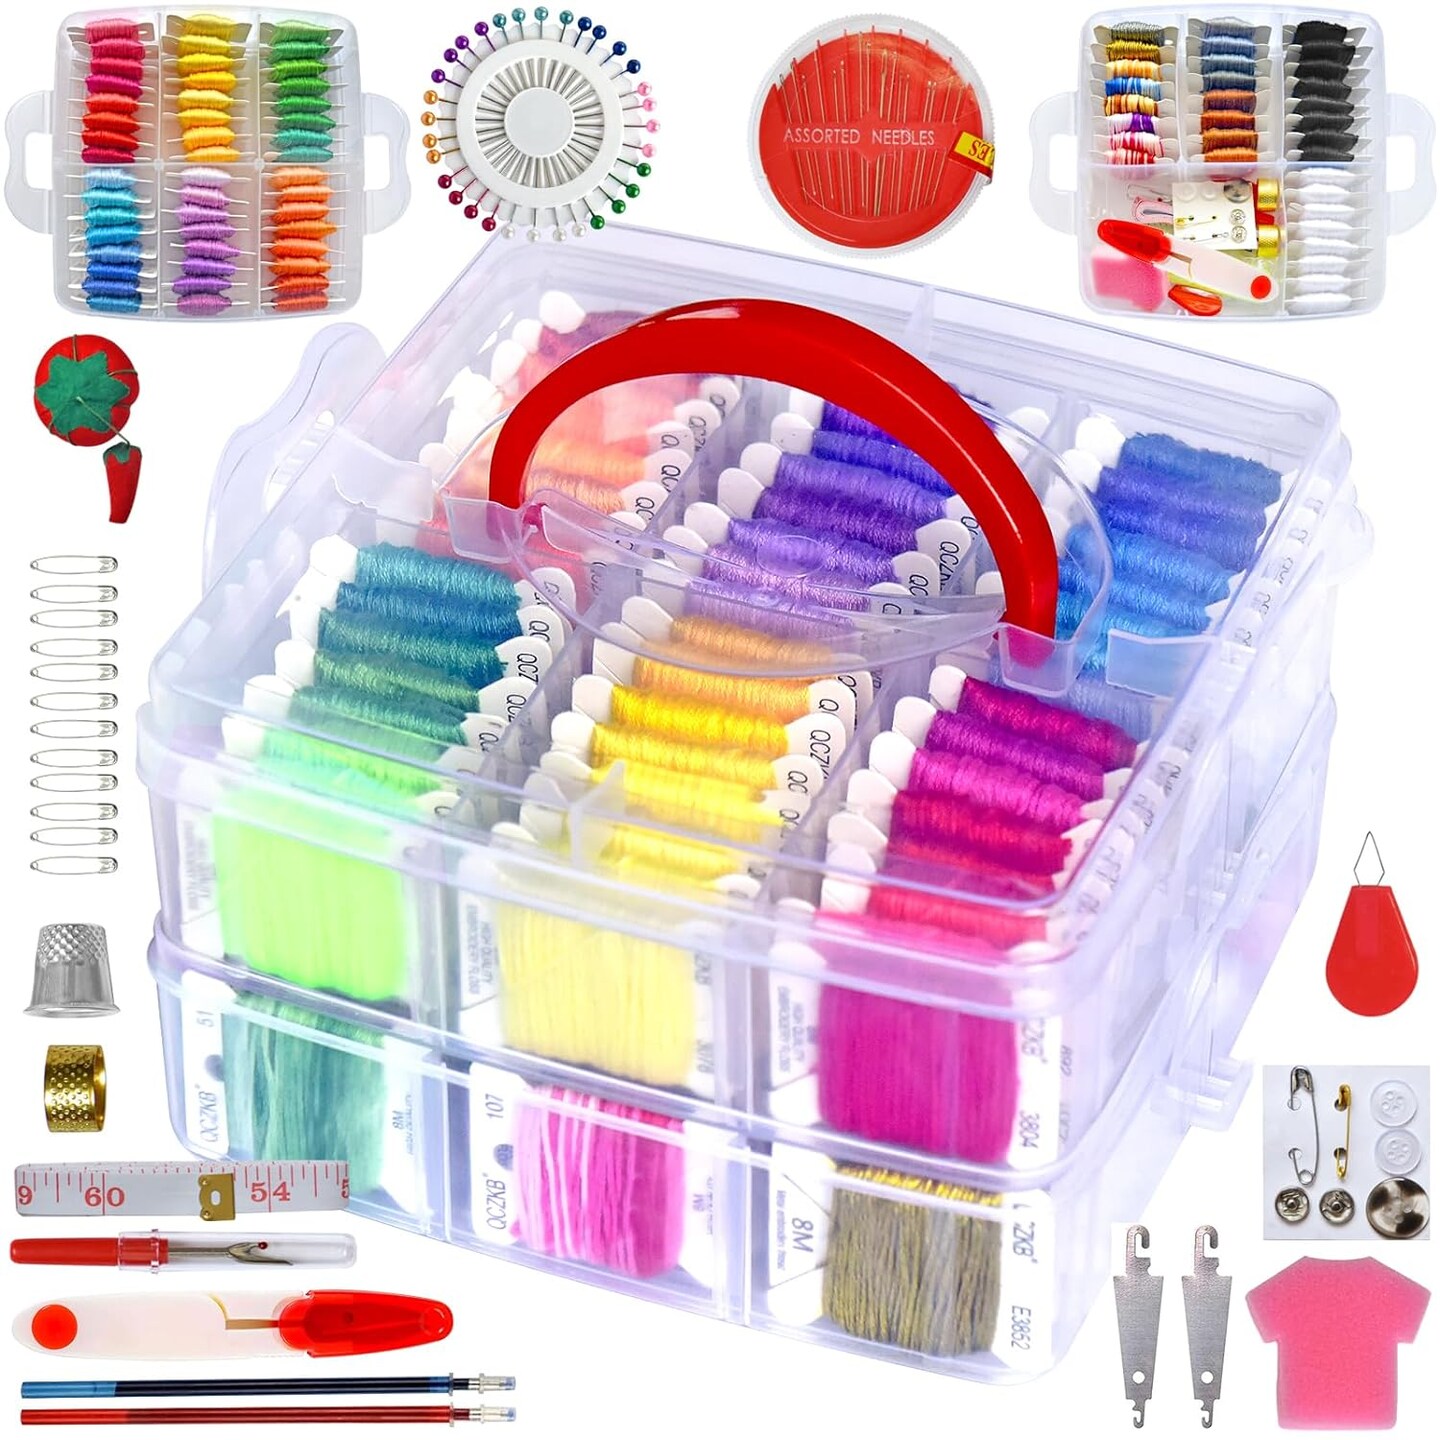 188 Embroidery Floss Set Including Cross Stitch Threads Friendship Bracelet String with 2-Tier Transparent Box, Floss Bobbins and Cross Stitch Kits, Cotton